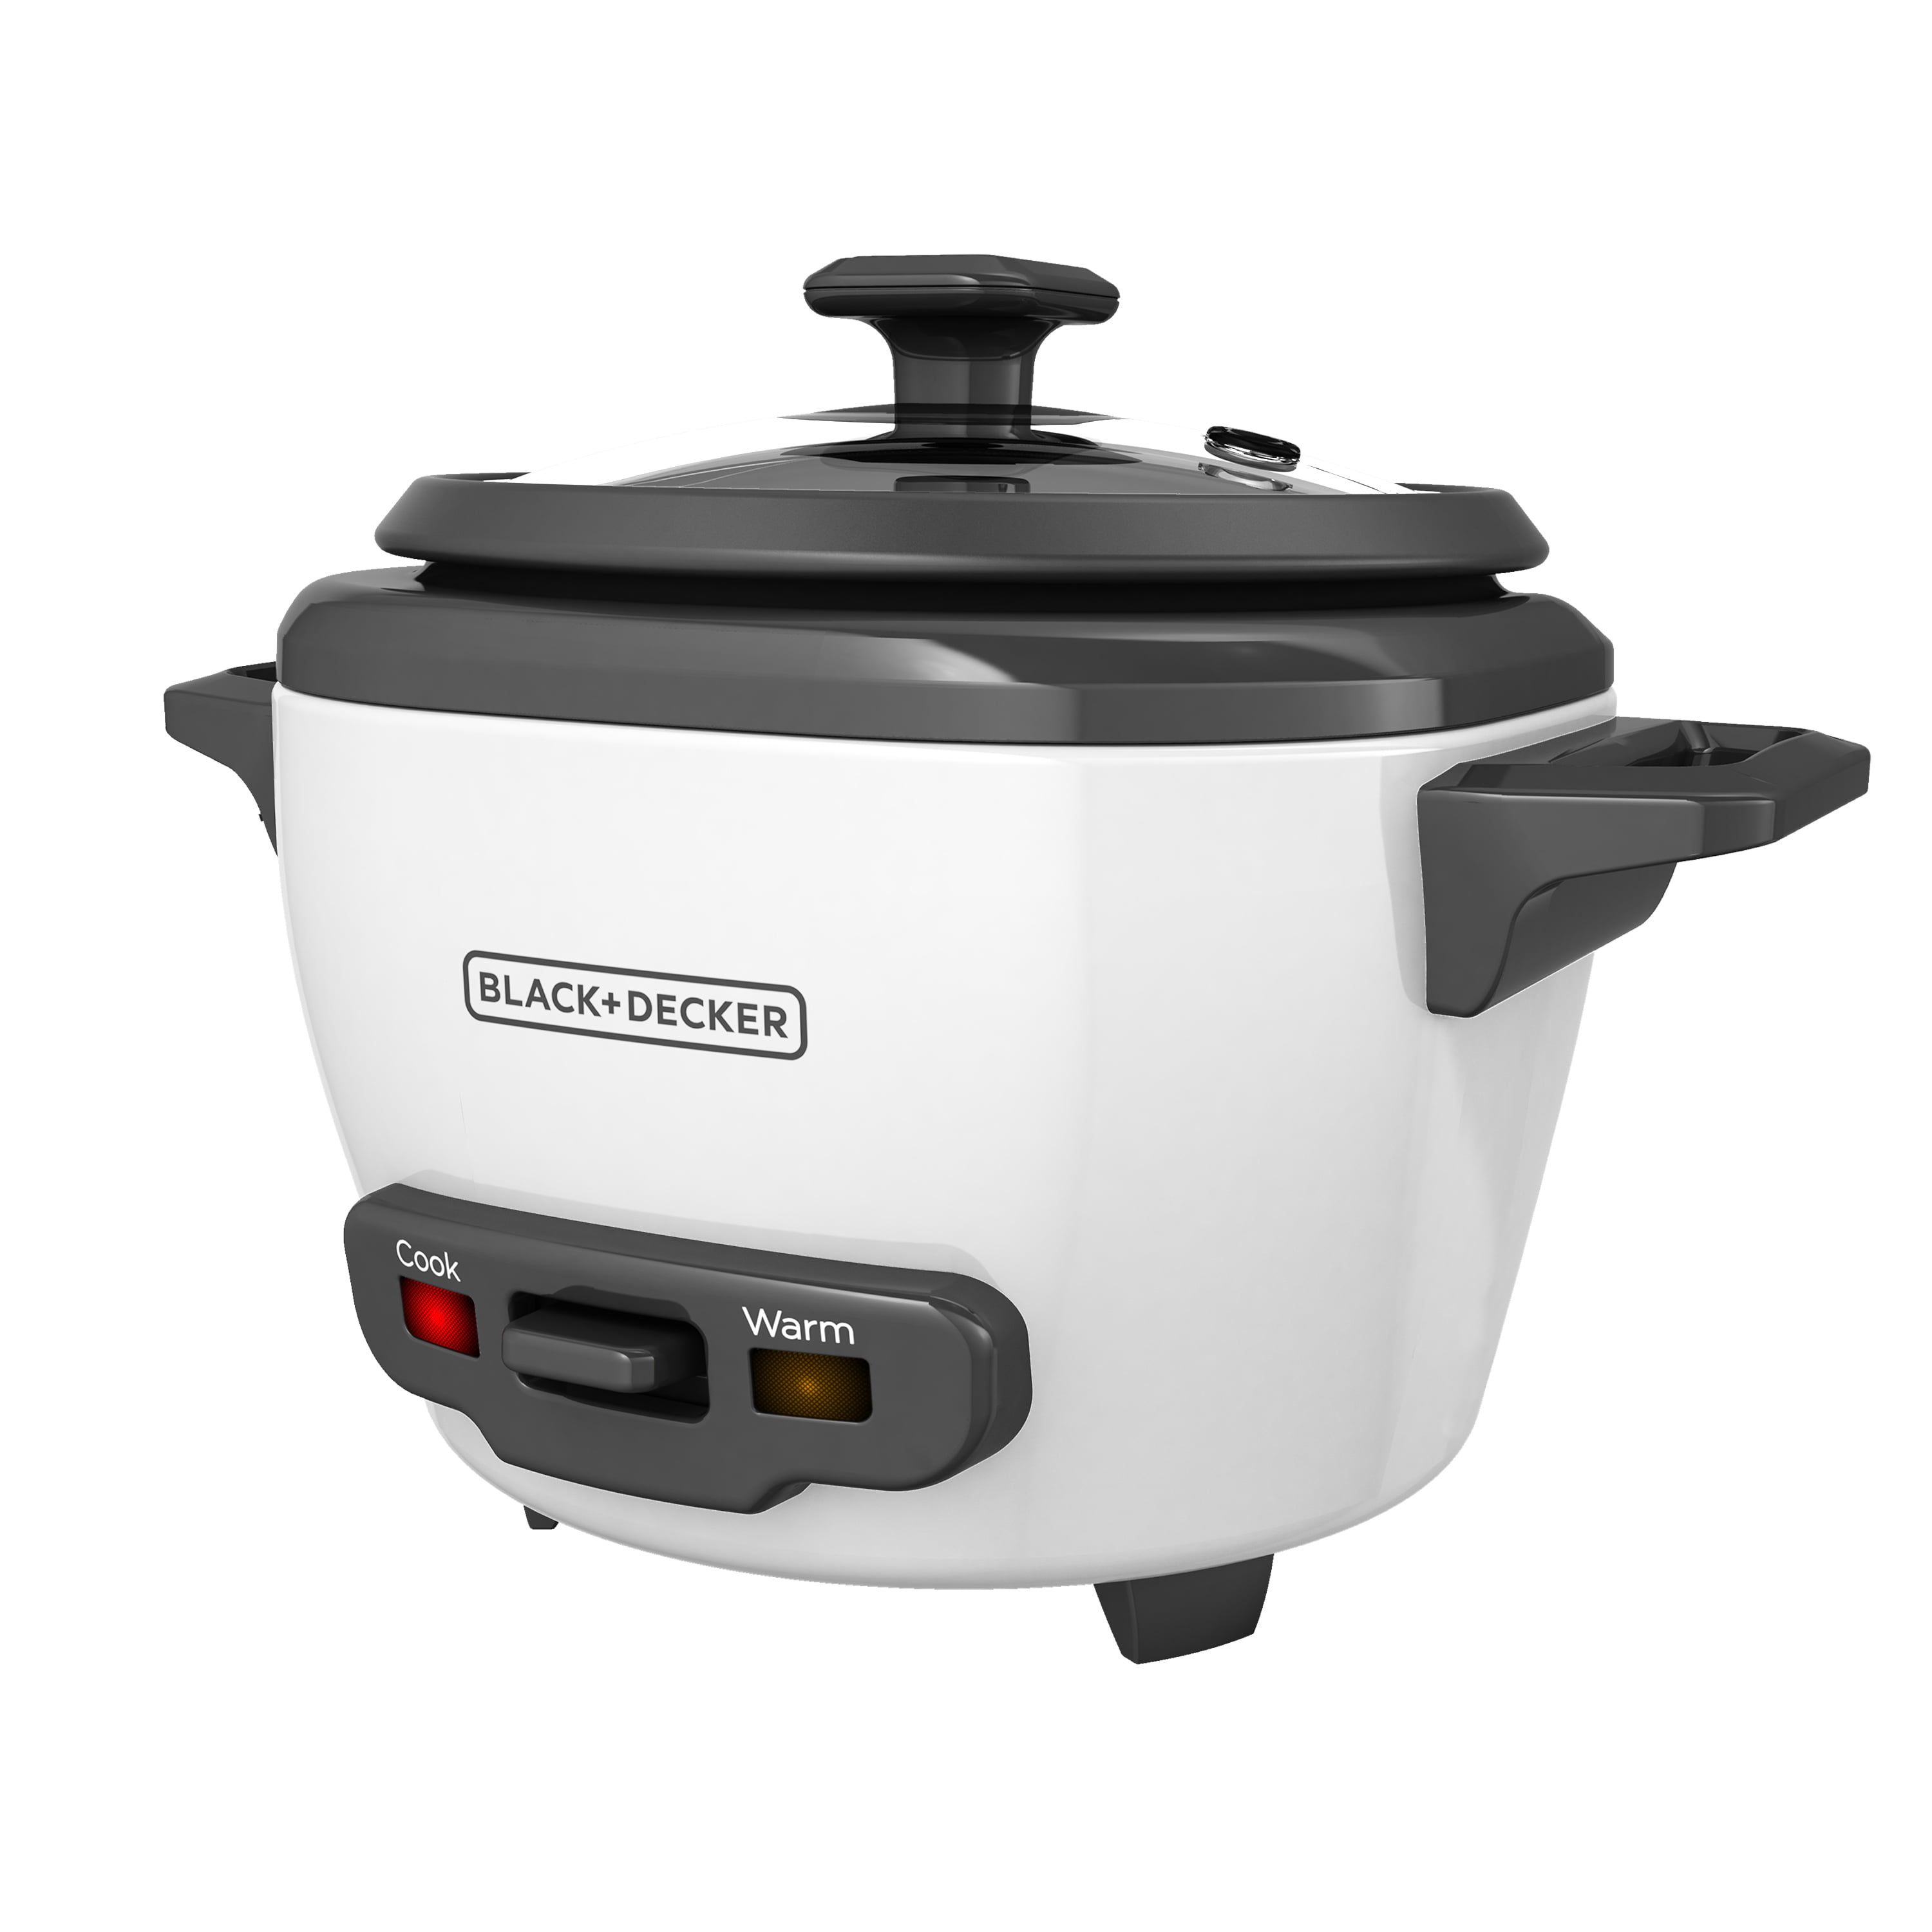 https://cdn.freshstore.cloud/offer/images/1706/559/black-decker-3-cup-electric-rice-cooker-with-keep-warm-function-white-rc503-559.jpeg